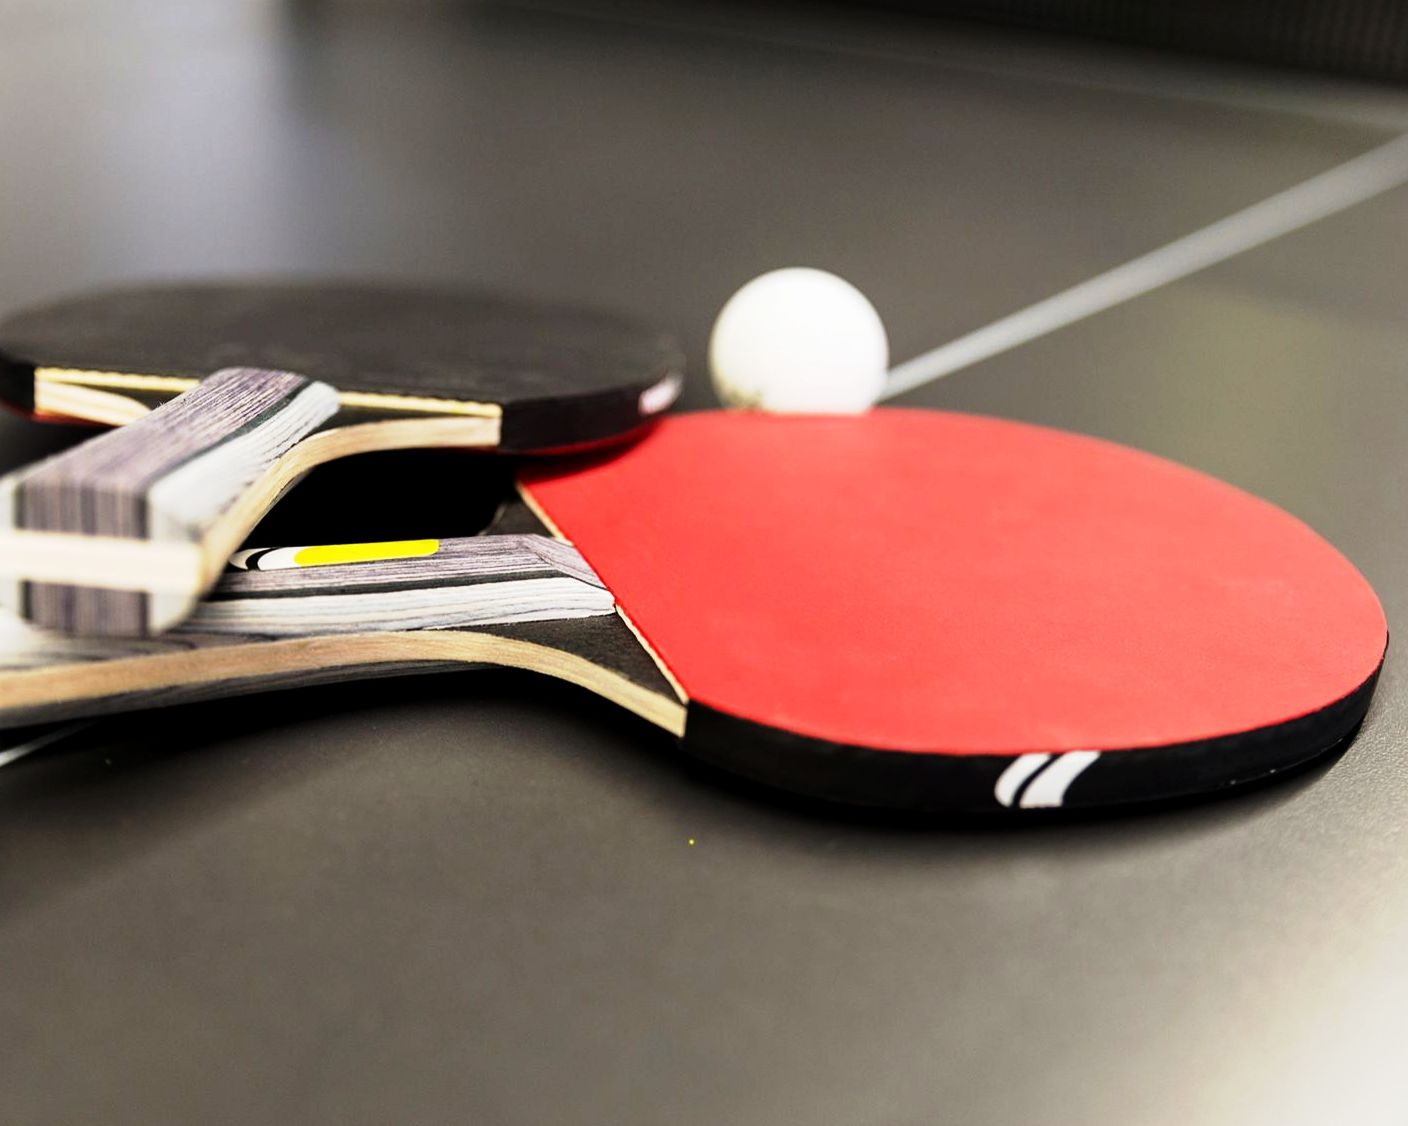 Ping pong rackets and ball on black table tennis